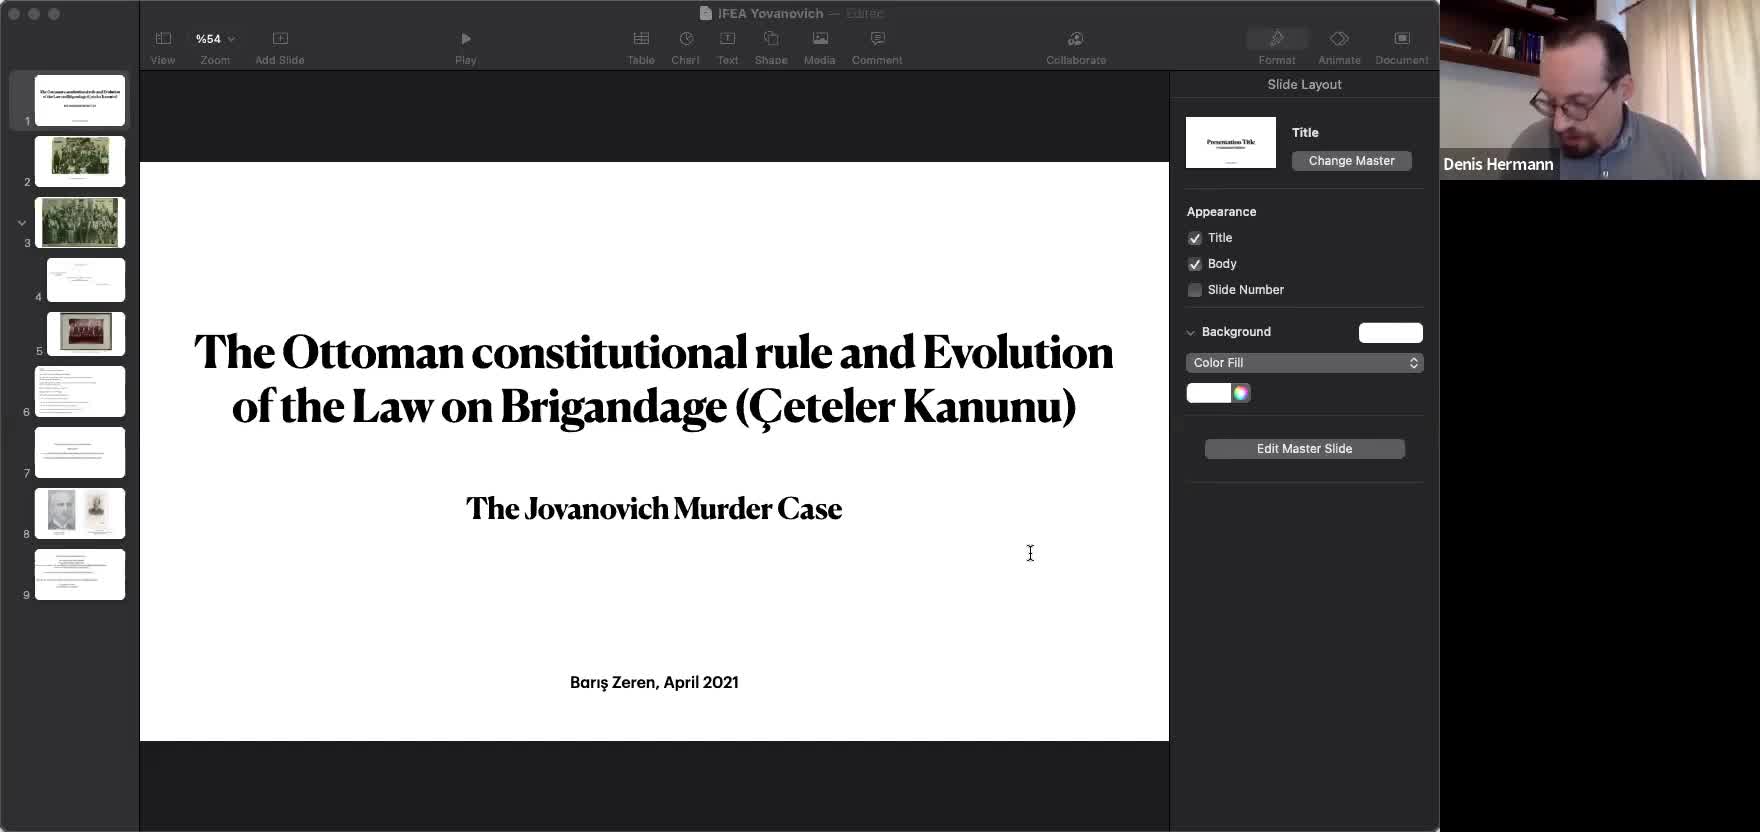 IFEA Histoire 2020-2021 The Ottoman constitutional rule and Evolution of the Law on Brigandage (Çeteler Kanunu): The Jovanovich Murder Case